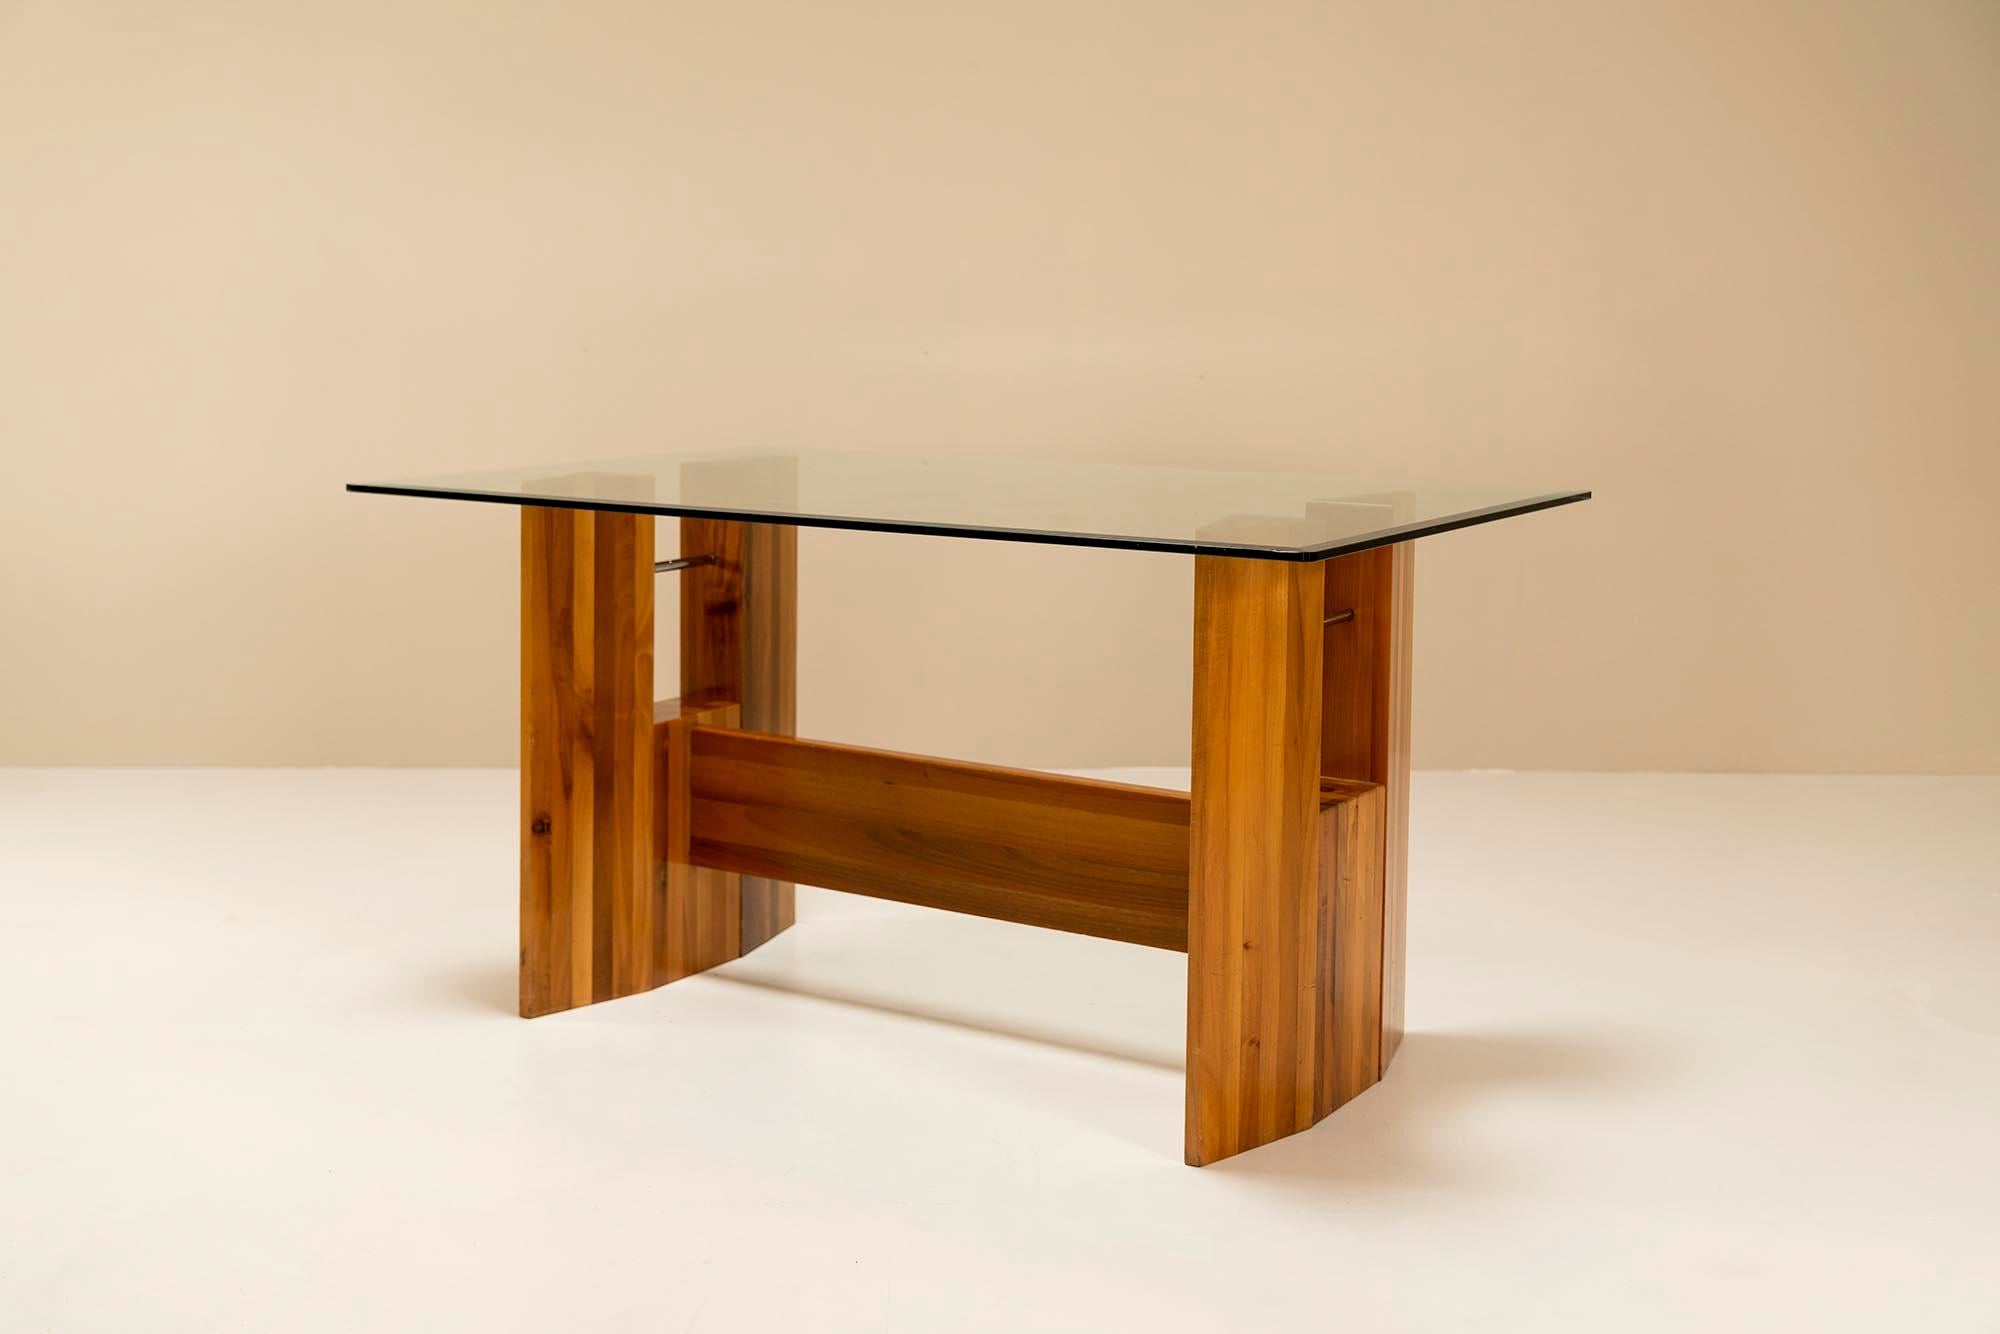 Italian Architectural Table or Desk in Walnut and Glass, Italy 1970s For Sale